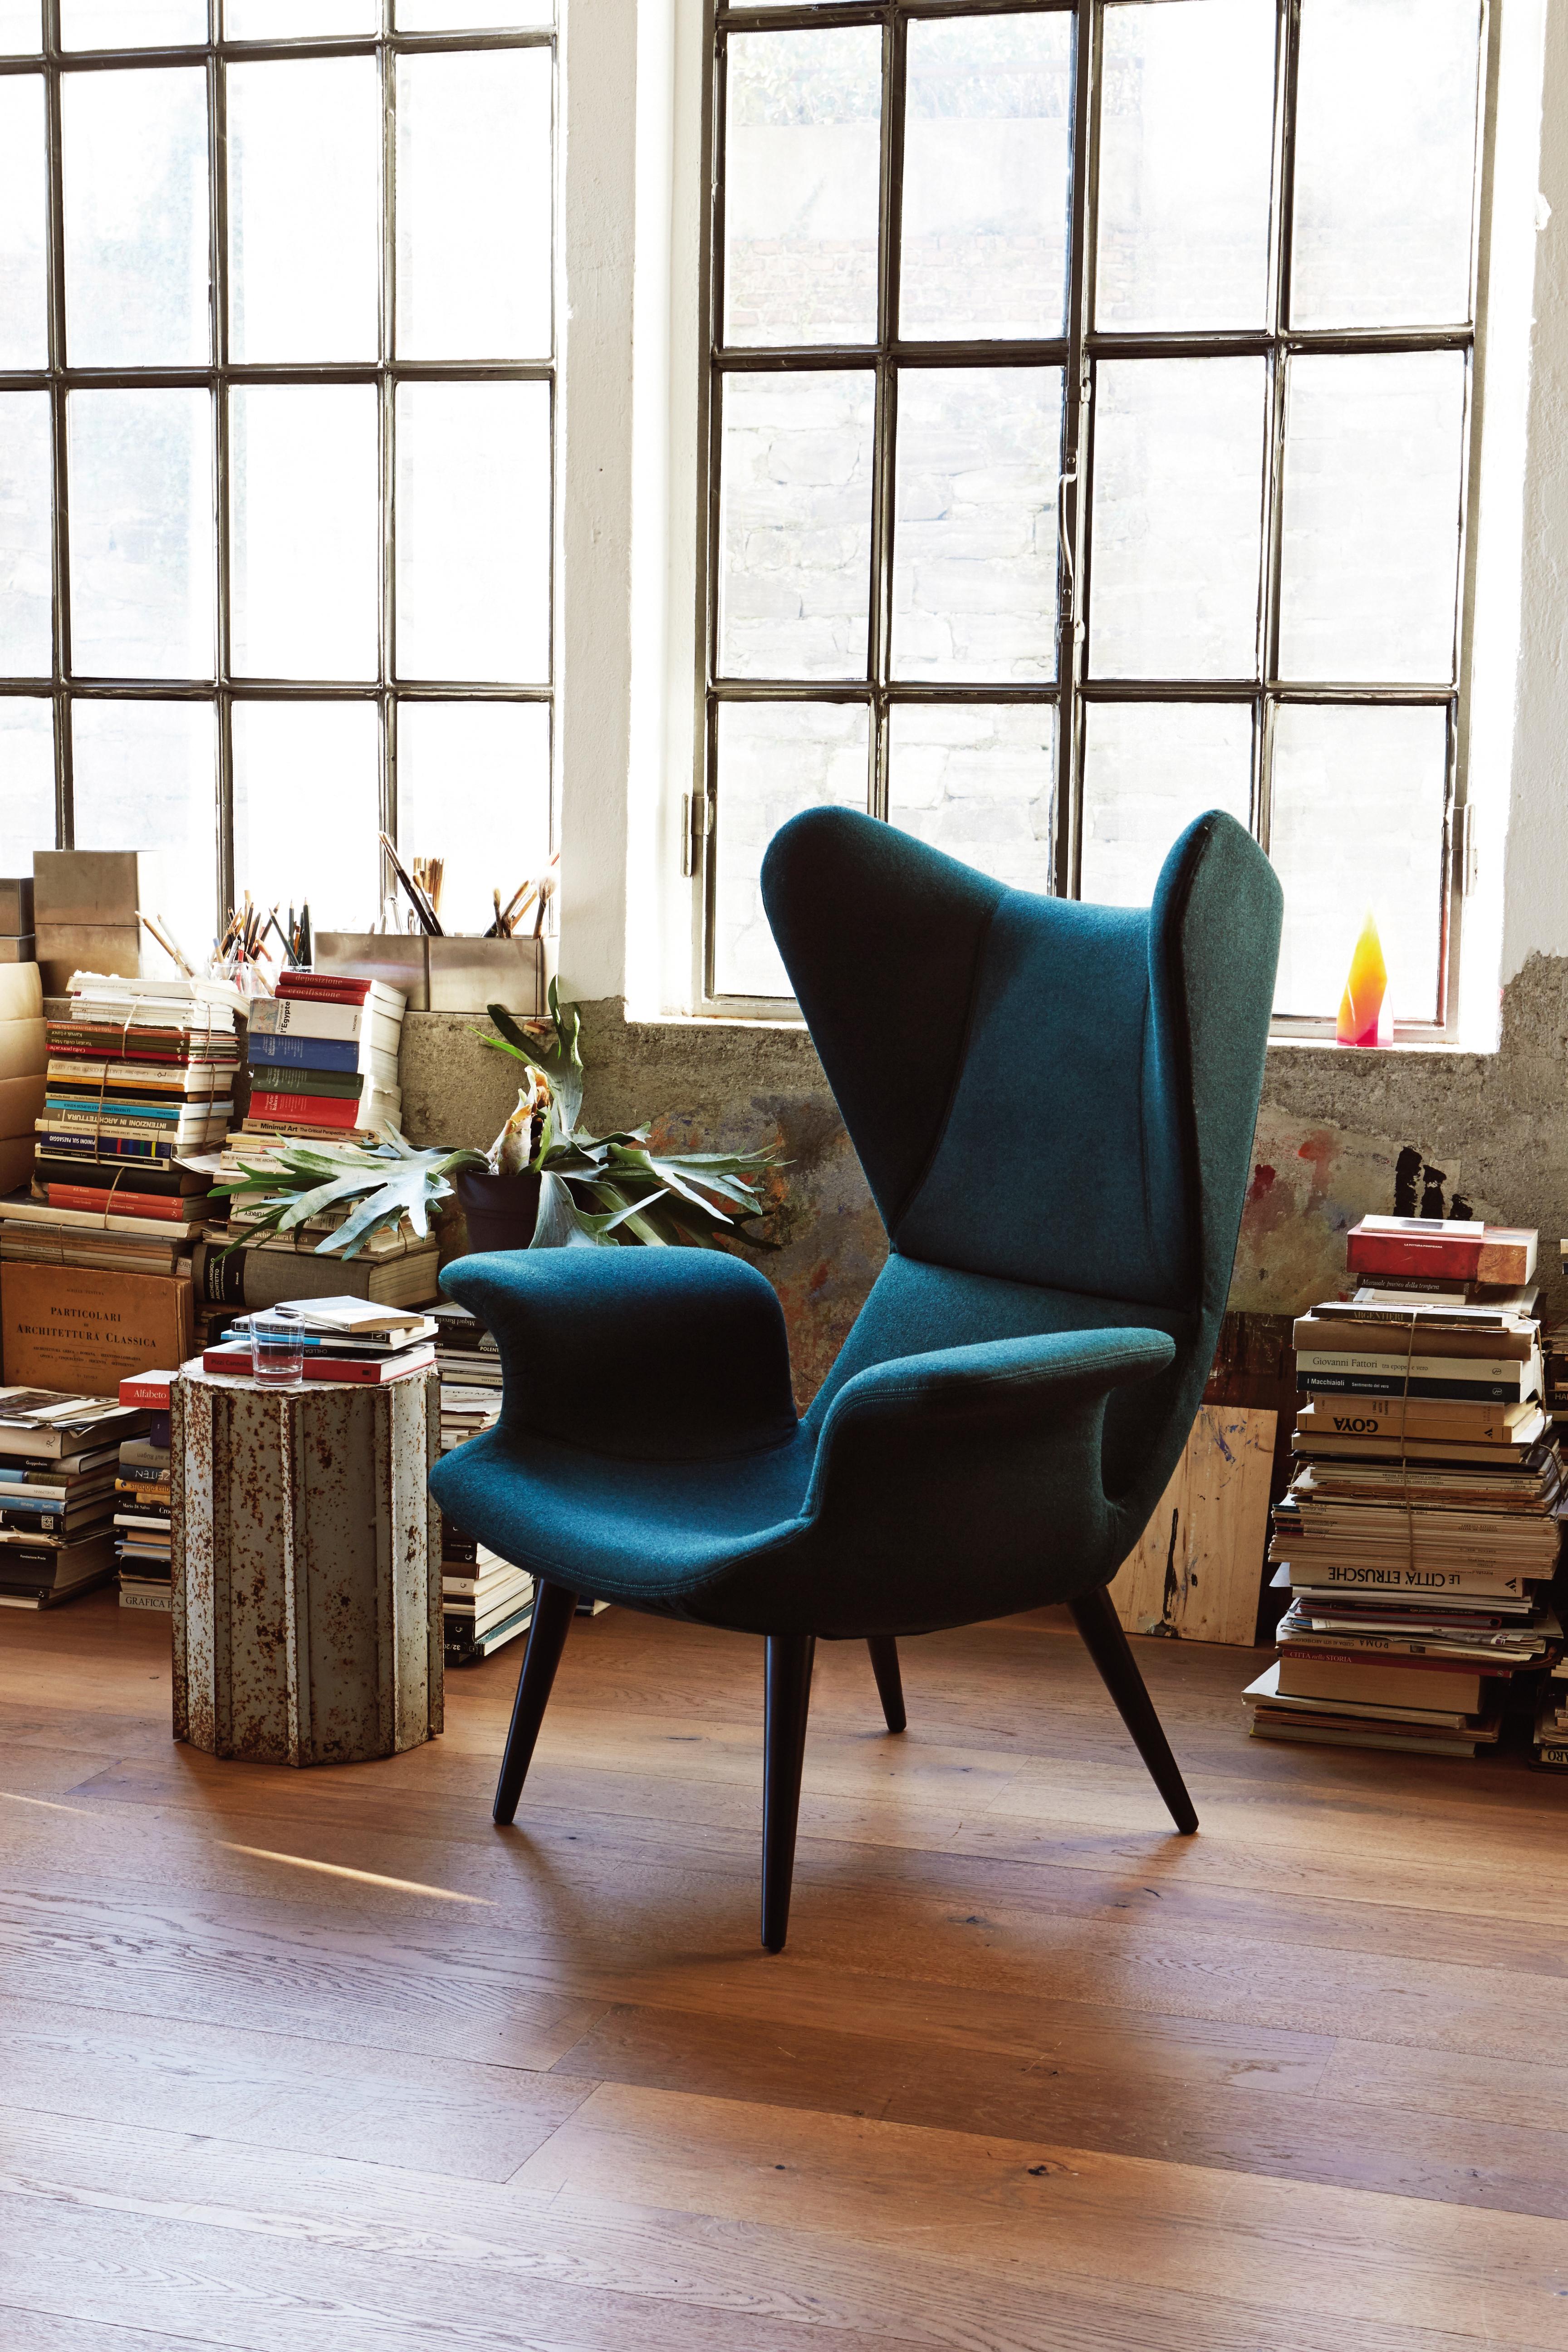 Retuning a Classic! Like a 1960s motorcycle with a new engine, every bit the attitude, but still a modern machine. A high back lounge chair with constant flowing lines, this has been designed as a personal space within the home or office for the